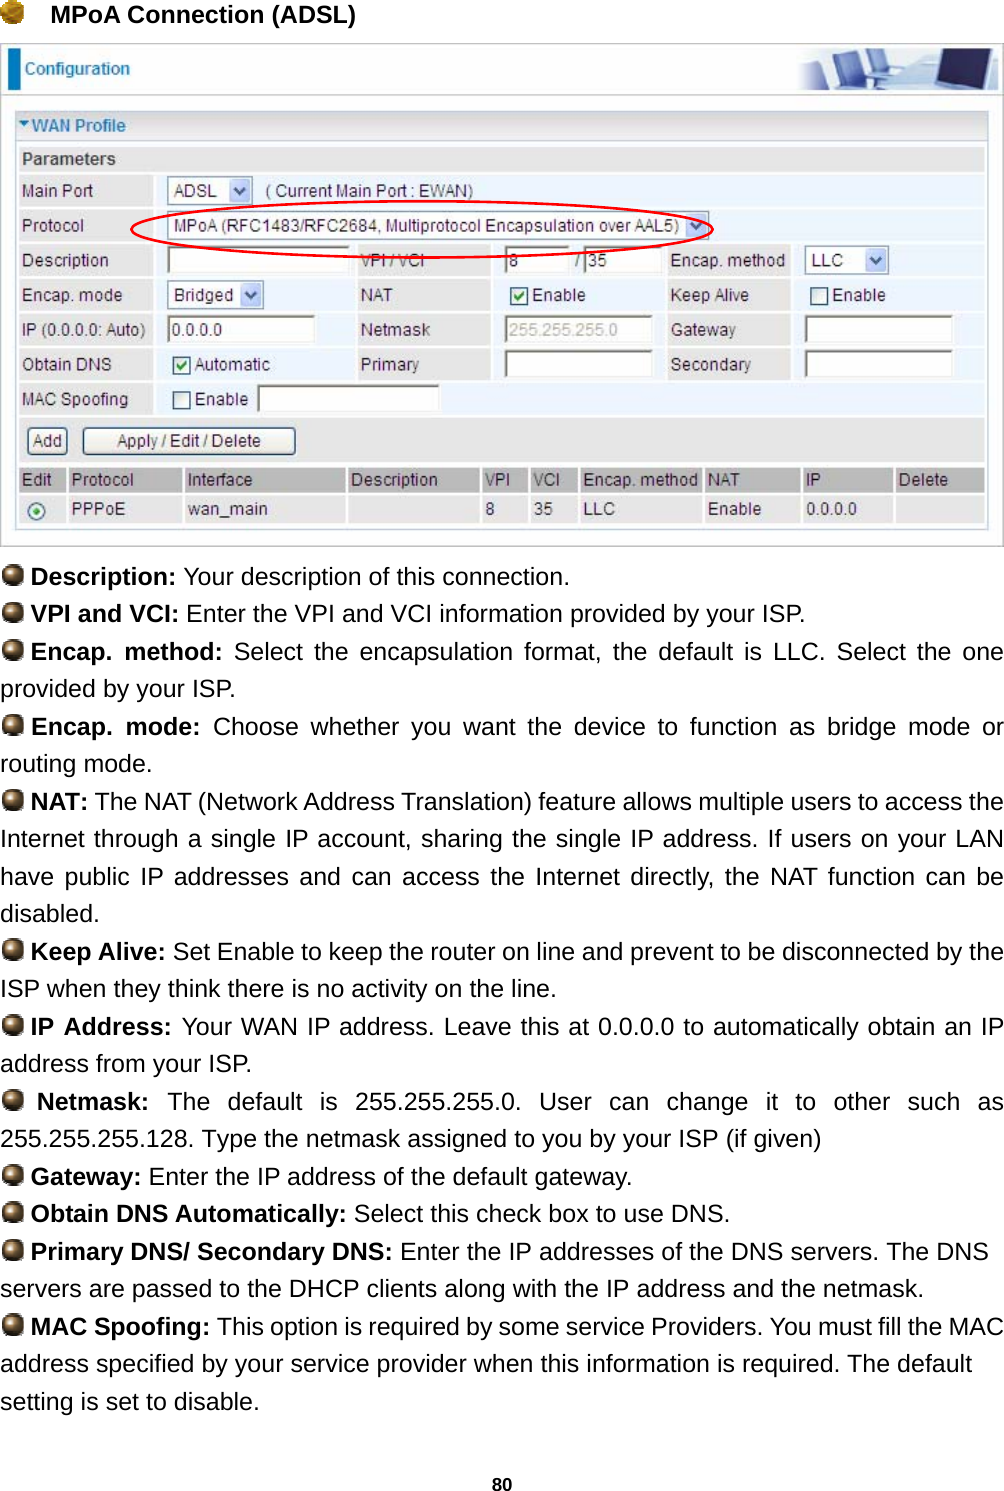 80  MPoA Connection (ADSL)   Description: Your description of this connection.  VPI and VCI: Enter the VPI and VCI information provided by your ISP.   Encap.  method: Select the encapsulation format, the default is LLC. Select the one provided by your ISP.  Encap.  mode:  Choose whether you want the device to function as bridge mode or routing mode.  NAT: The NAT (Network Address Translation) feature allows multiple users to access the Internet through a single IP account, sharing the single IP address. If users on your LAN have public IP addresses and can access the Internet directly, the NAT function can be disabled.  Keep Alive: Set Enable to keep the router on line and prevent to be disconnected by the ISP when they think there is no activity on the line.  IP Address: Your WAN IP address. Leave this at 0.0.0.0 to automatically obtain an IP address from your ISP.  Netmask:  The default is 255.255.255.0. User can change it to other such as 255.255.255.128. Type the netmask assigned to you by your ISP (if given)  Gateway: Enter the IP address of the default gateway.  Obtain DNS Automatically: Select this check box to use DNS.  Primary DNS/ Secondary DNS: Enter the IP addresses of the DNS servers. The DNS servers are passed to the DHCP clients along with the IP address and the netmask.  MAC Spoofing: This option is required by some service Providers. You must fill the MAC address specified by your service provider when this information is required. The default setting is set to disable.